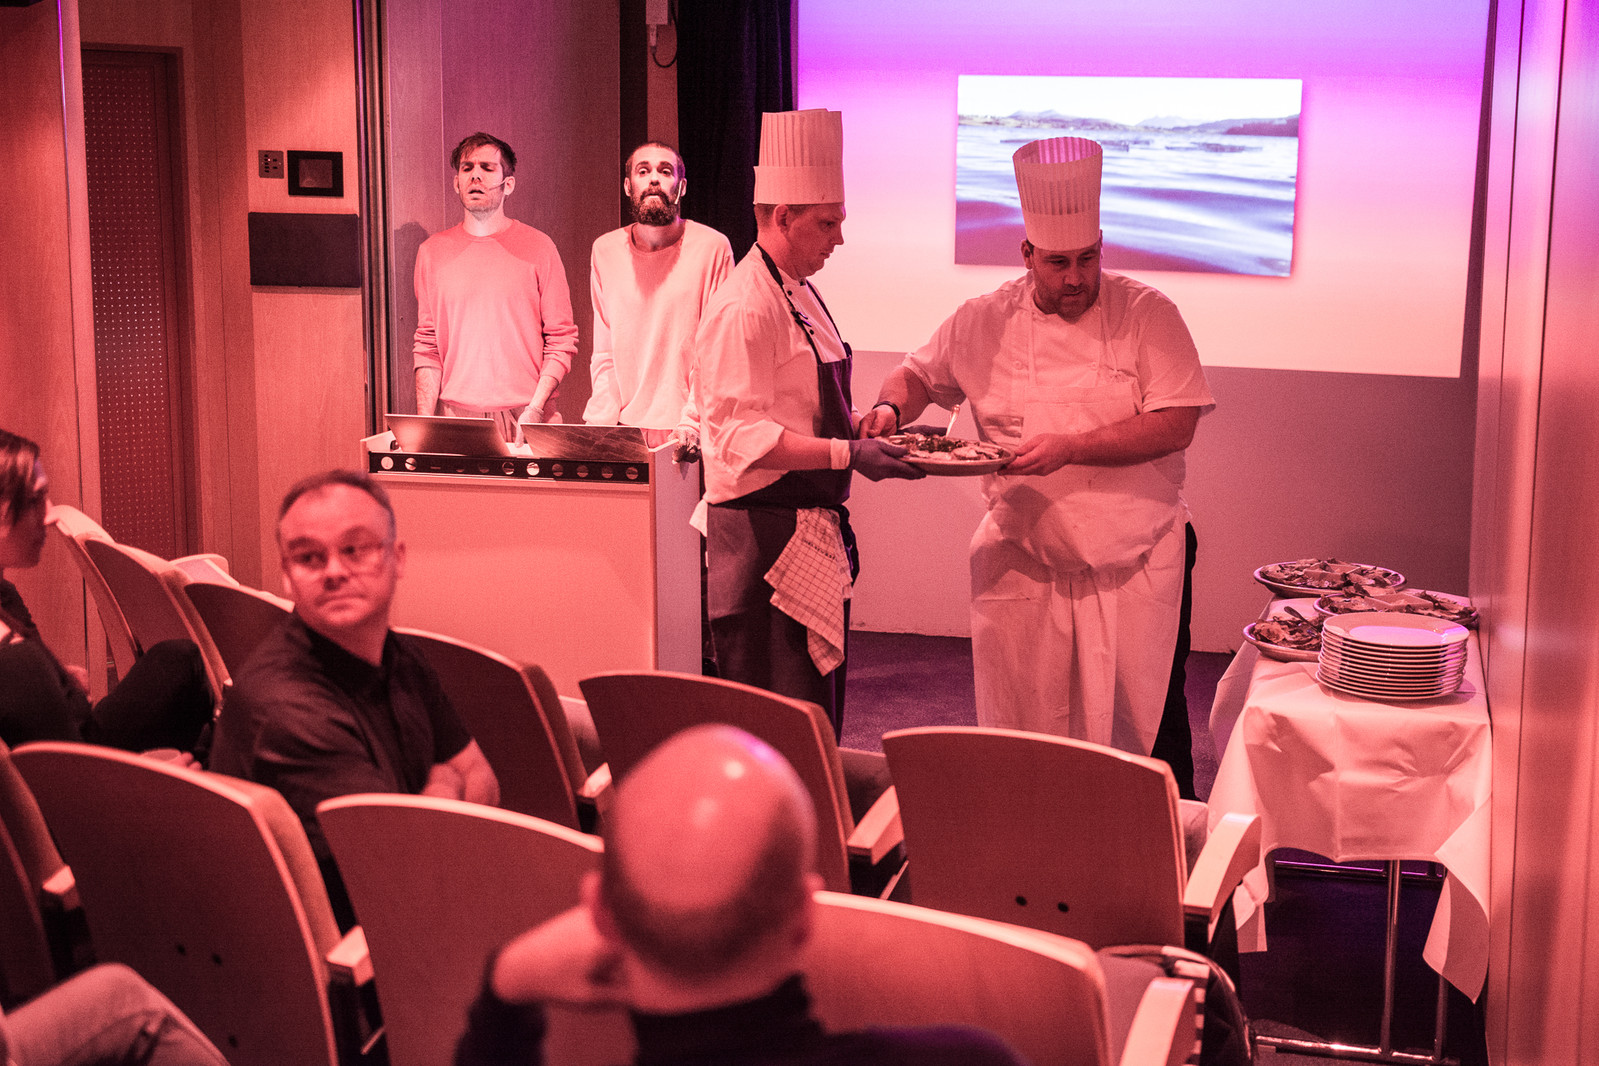 CLIMAVORE: On Tidal Zones. Lecture-performance by Cooking Sections (Daniel Fernández Pascual and Alon Schwabe) during the second edition "Rugged, Weathered above the sea", curated by Charles Aubin in 2018. Photo: Laimonas Puisys